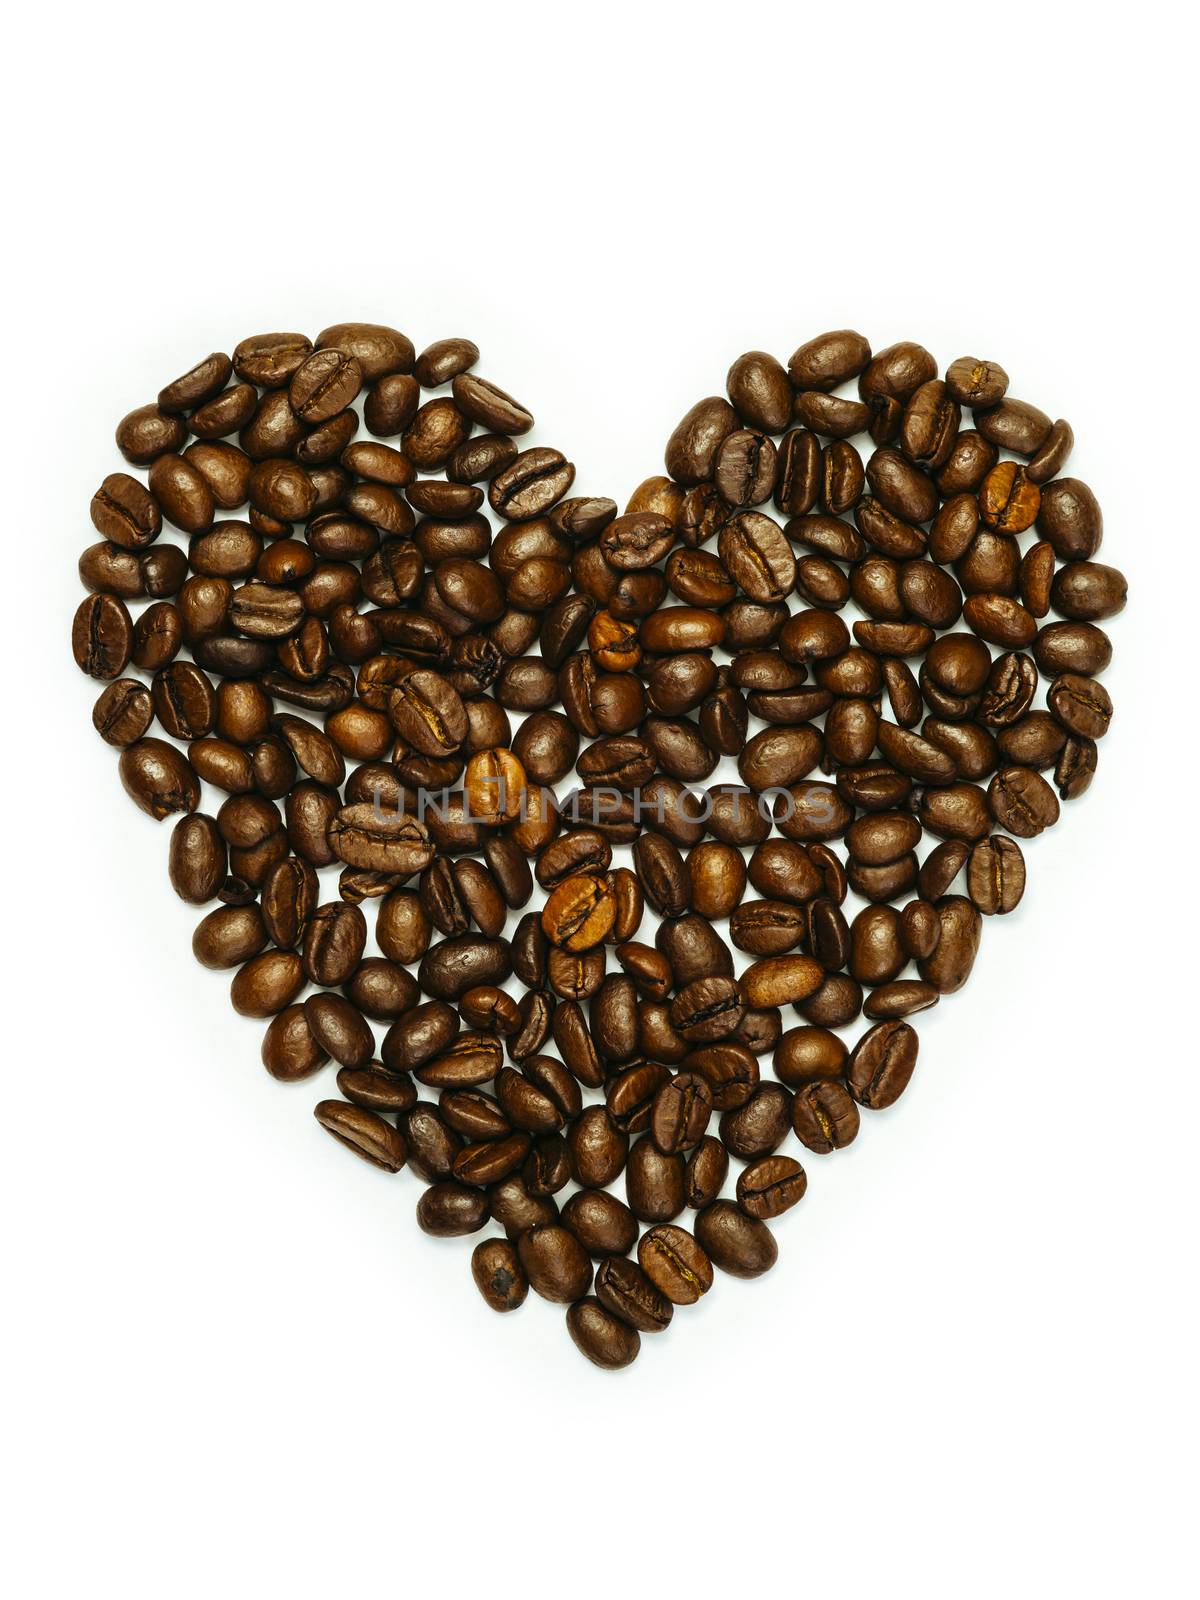 Heart-shaped coffee beans by sumners